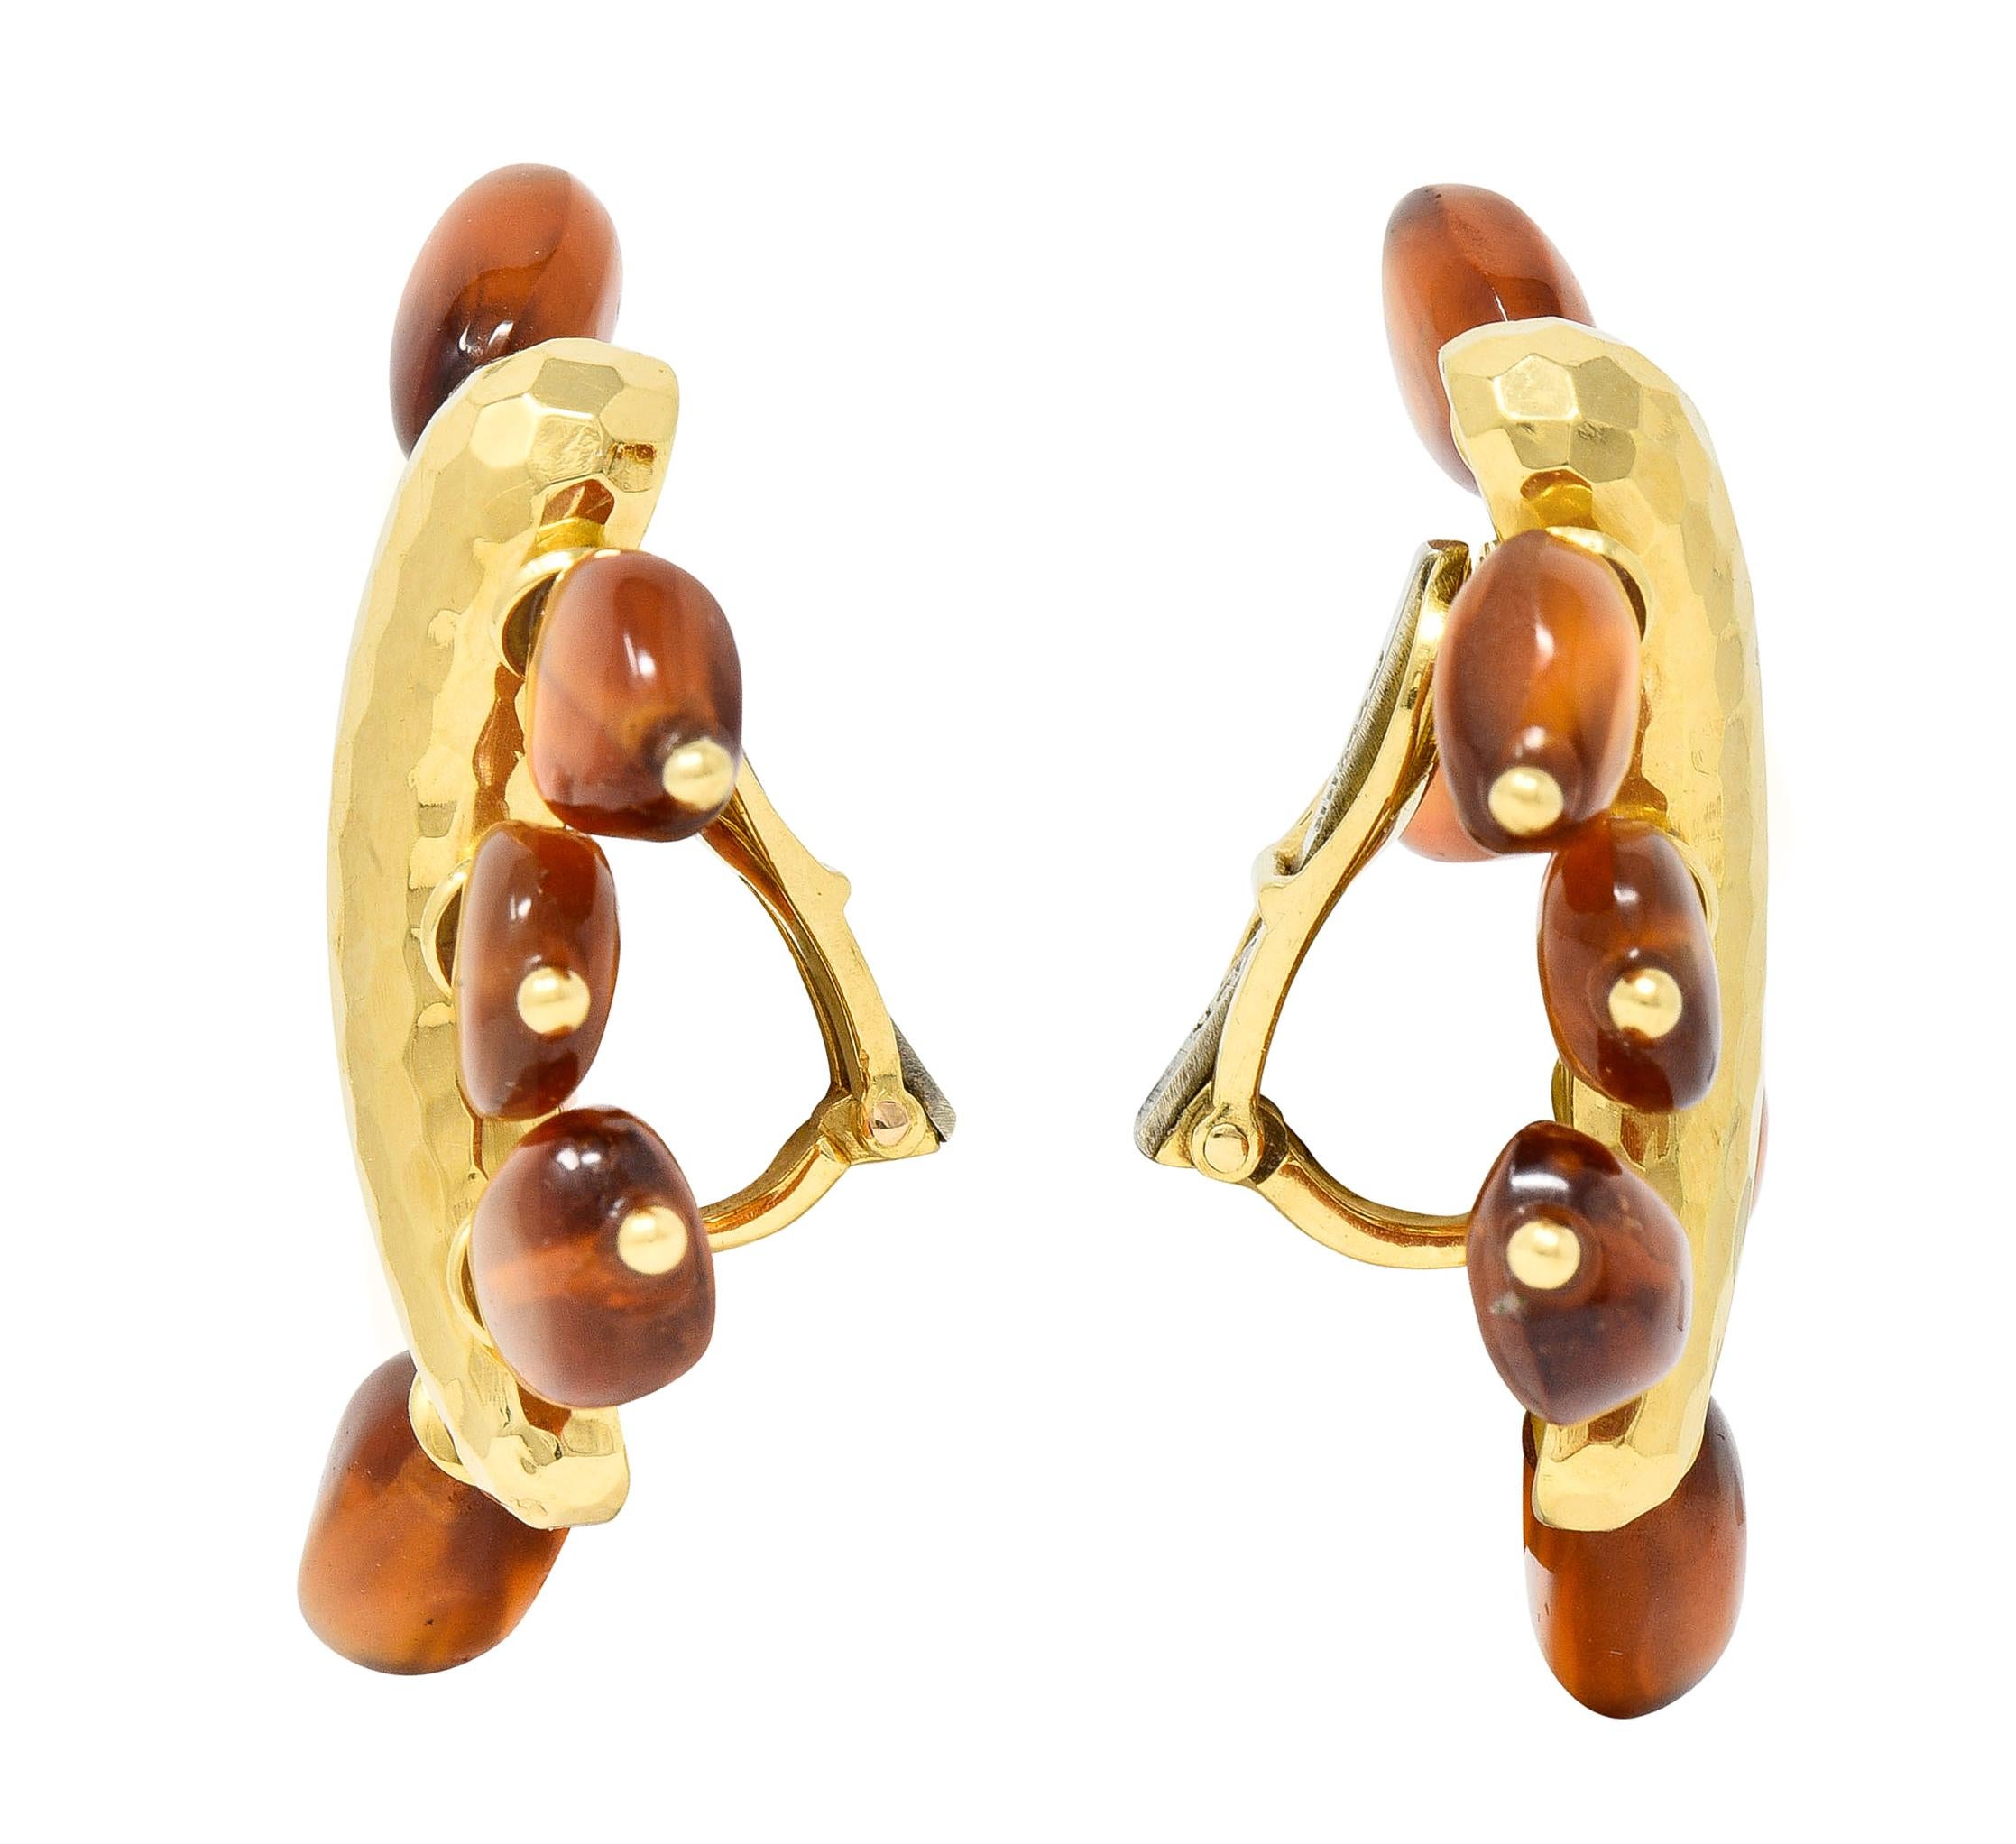 Comprised of hammered teardrop-shaped gold forms with fanning citrine beads
Beads are tumbled and organically shaped - ranging in size from 7.5 to 12.0 mm
Transparent medium brownish orange in color - with beaded gold terminals
With high polish